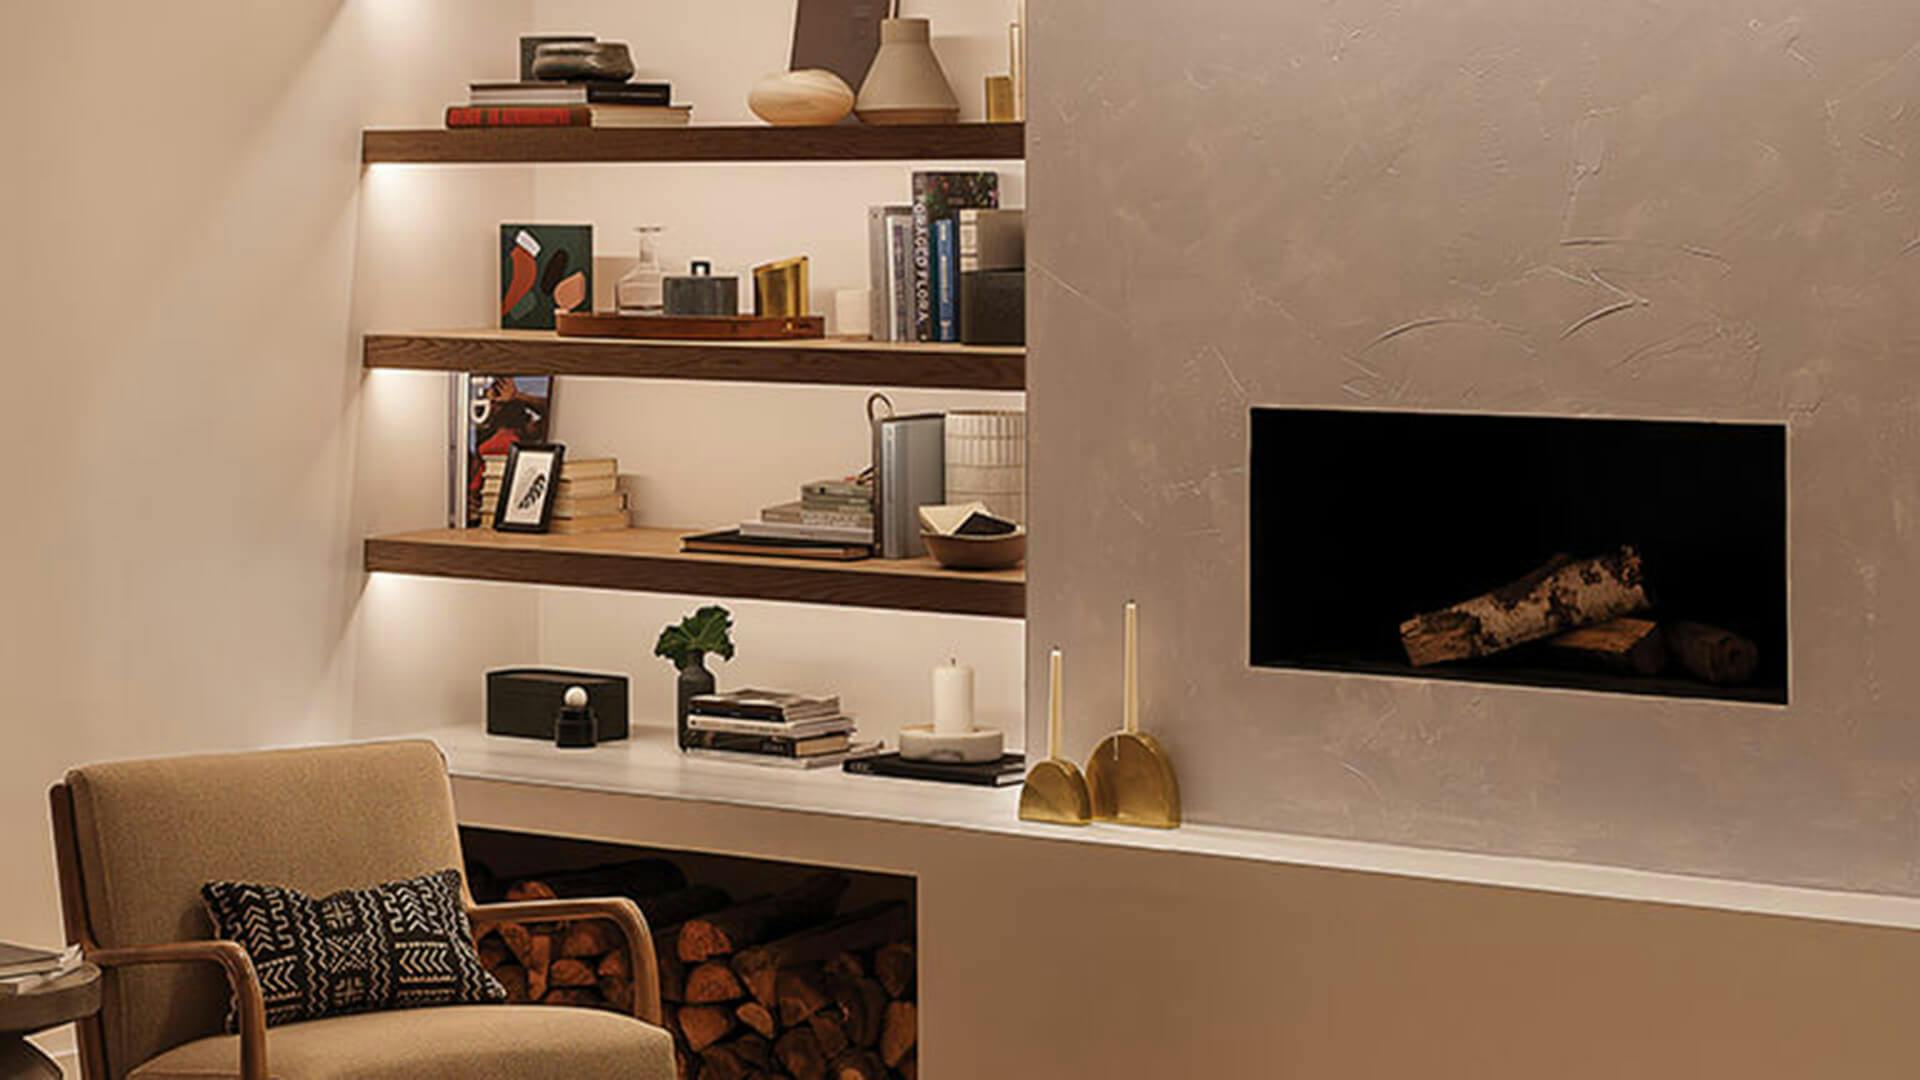 Tight shot of a fireplace beside an integrated bookshelf with channel lighting underneath the shelves